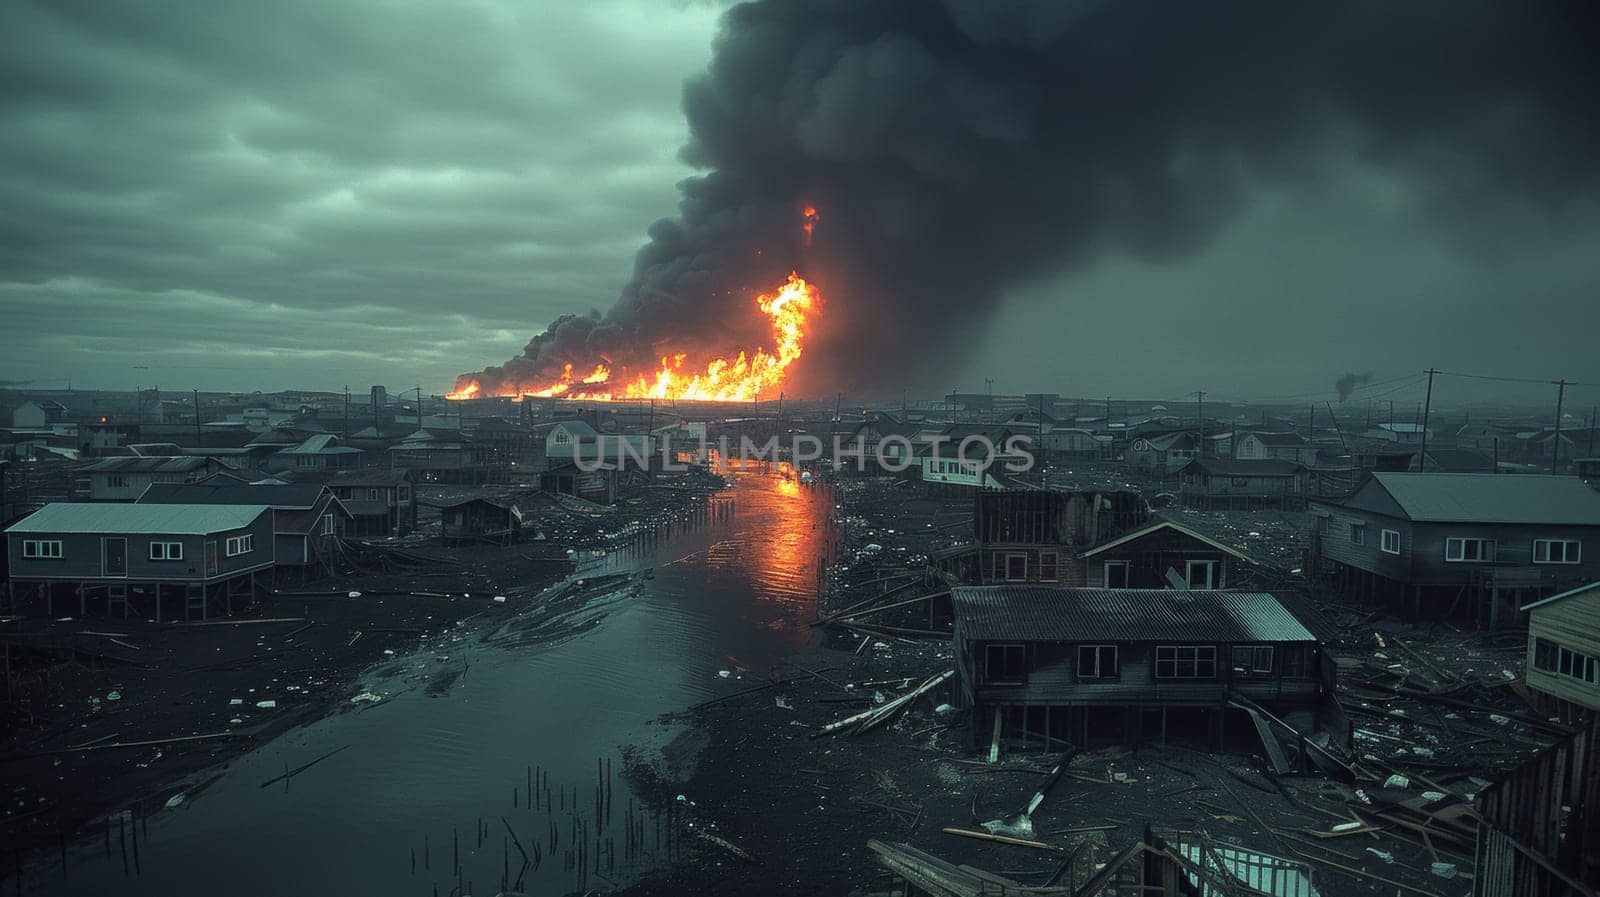 A large fire is burning in a city near some houses, AI by starush